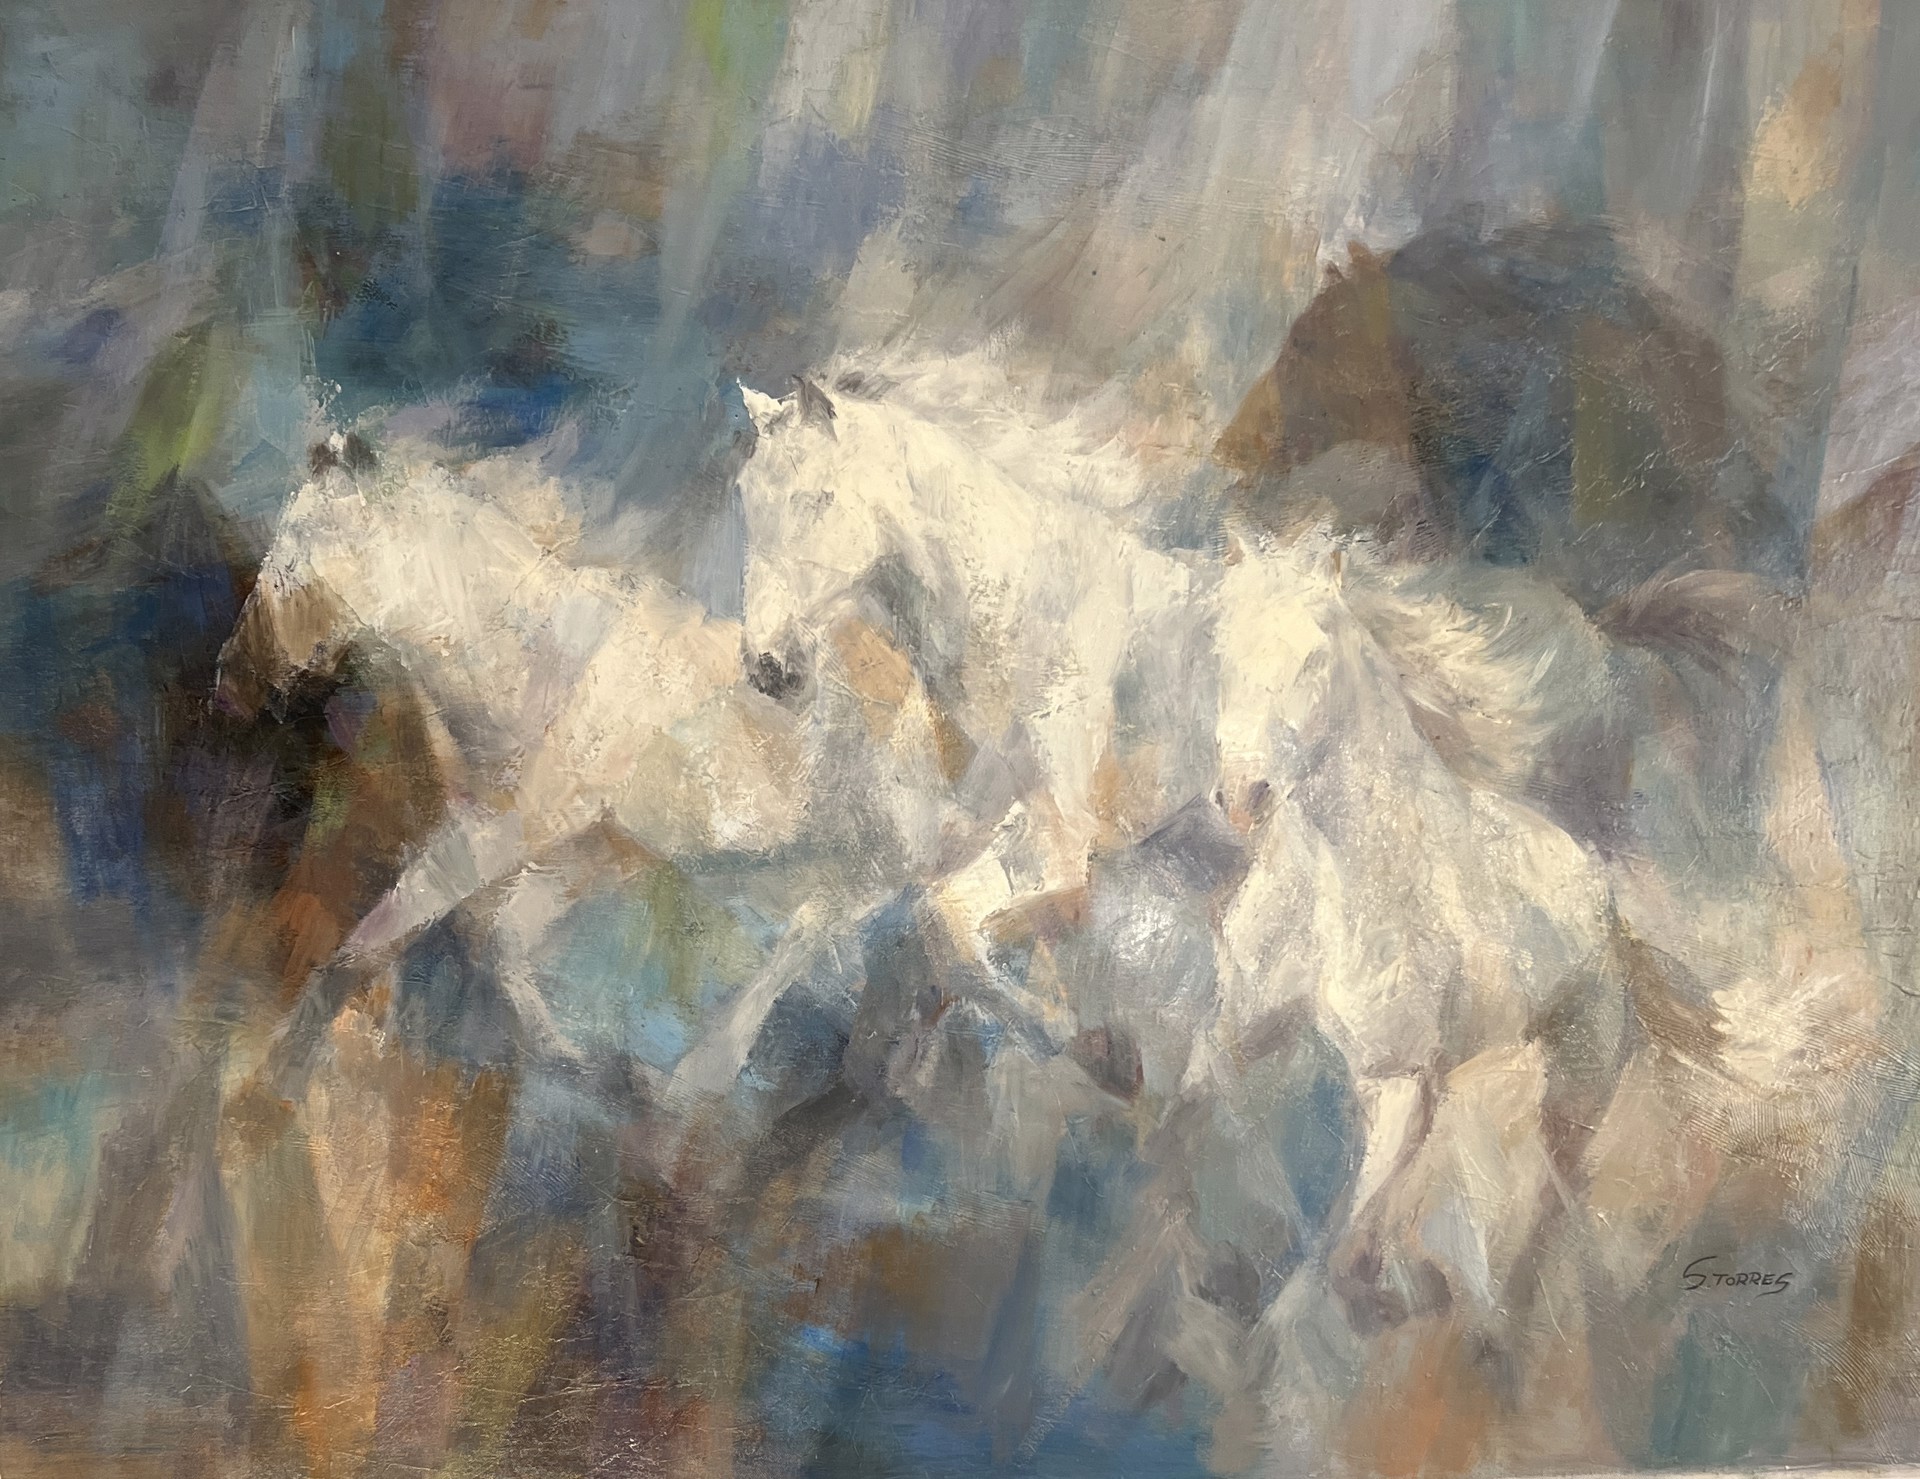 ABSTRACT HORSES by S TORRES